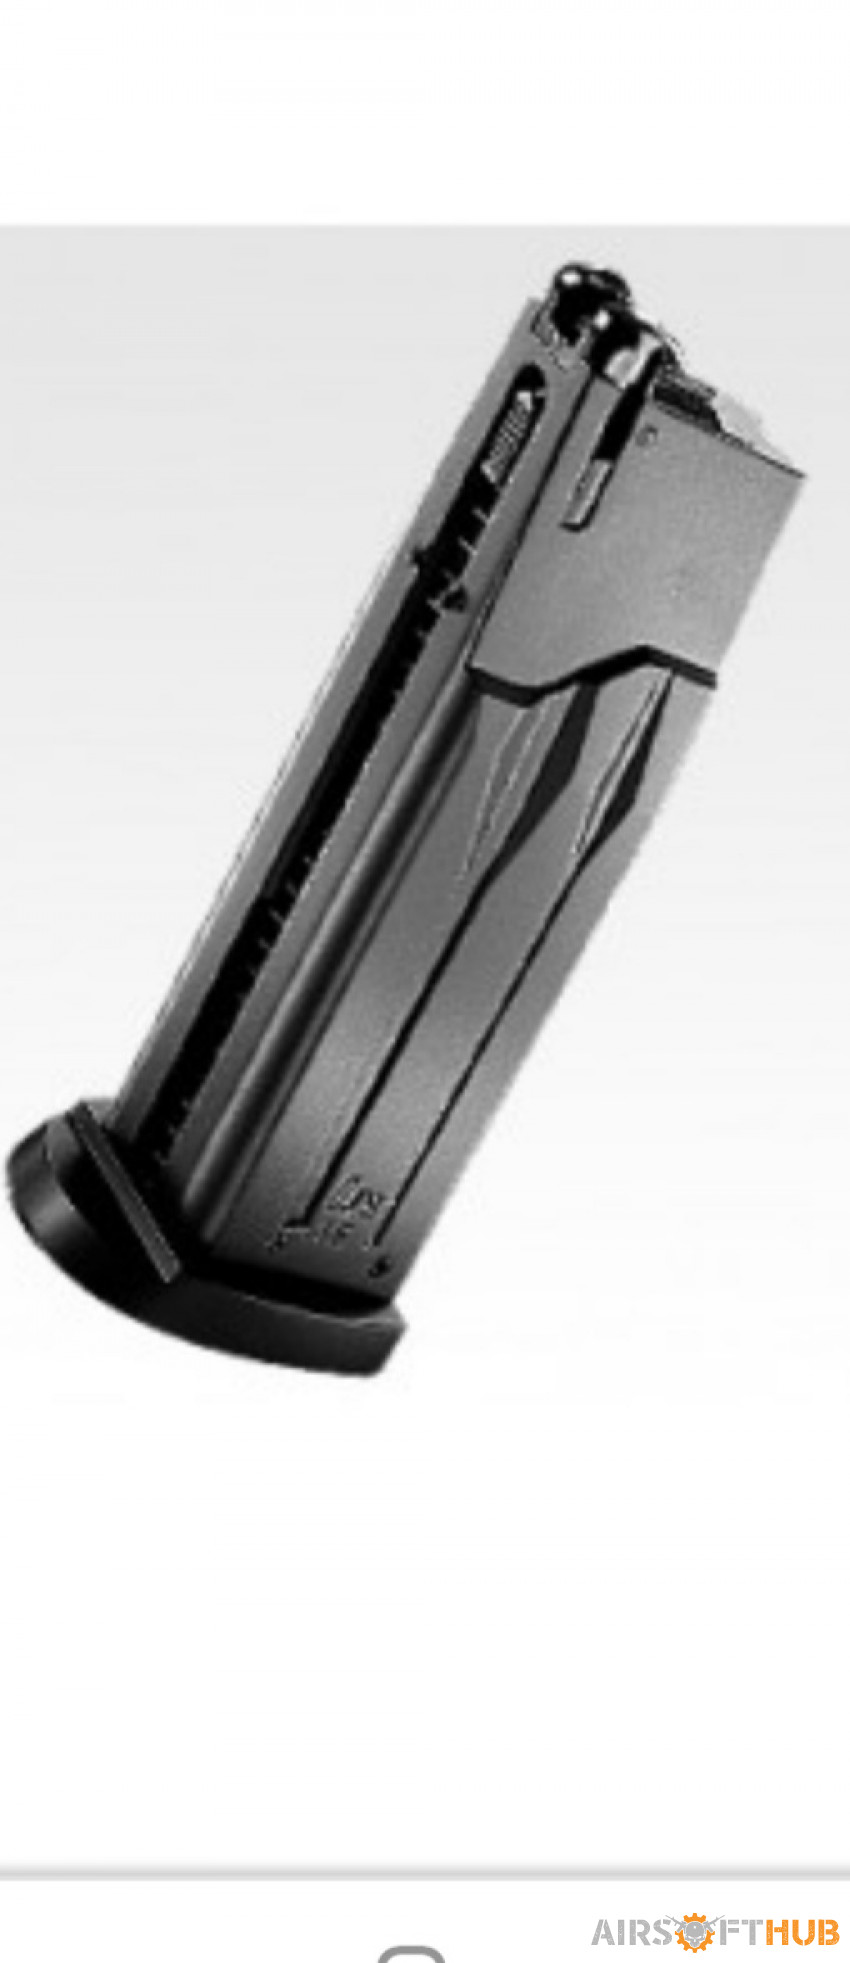 Mk23 mags - Used airsoft equipment